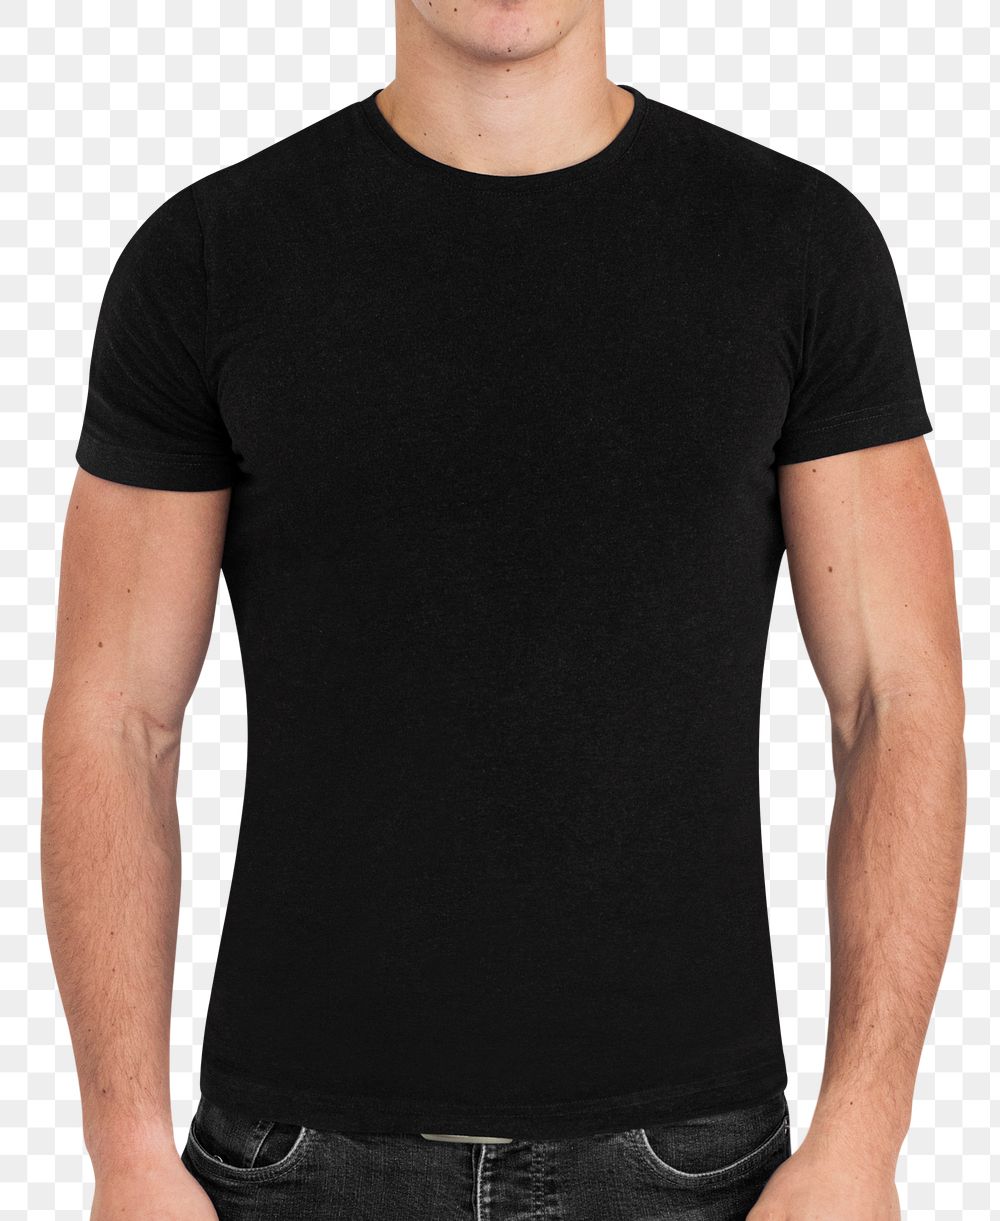 Simple t-shirt png mockup worn by a man on transparent background